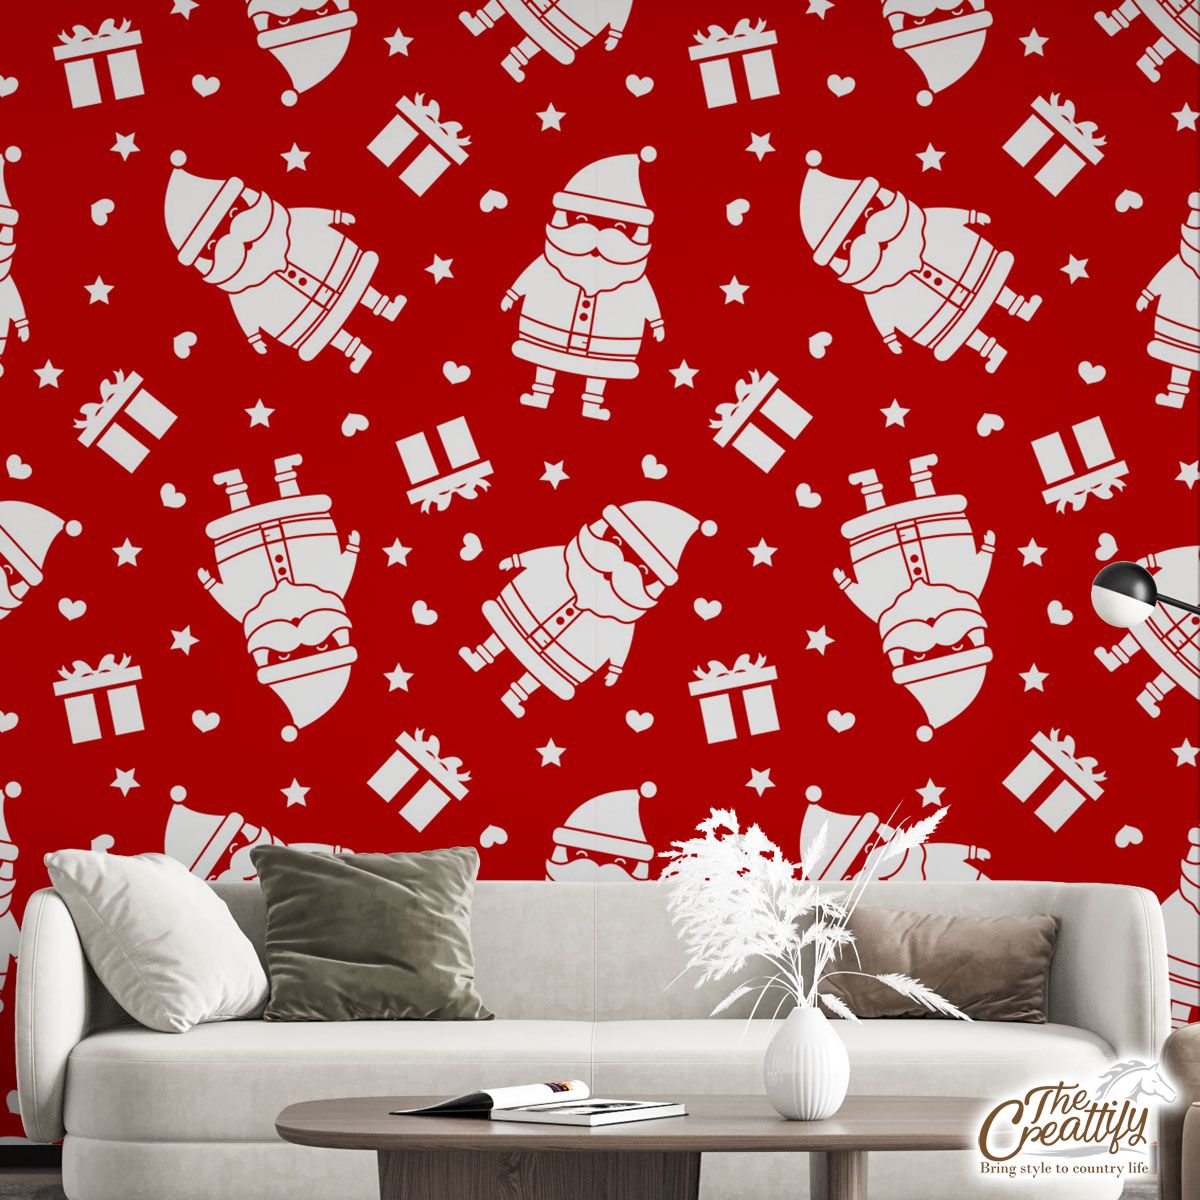 Cute Santa Claus With Christmas Gifts On The Red Background Wall Mural